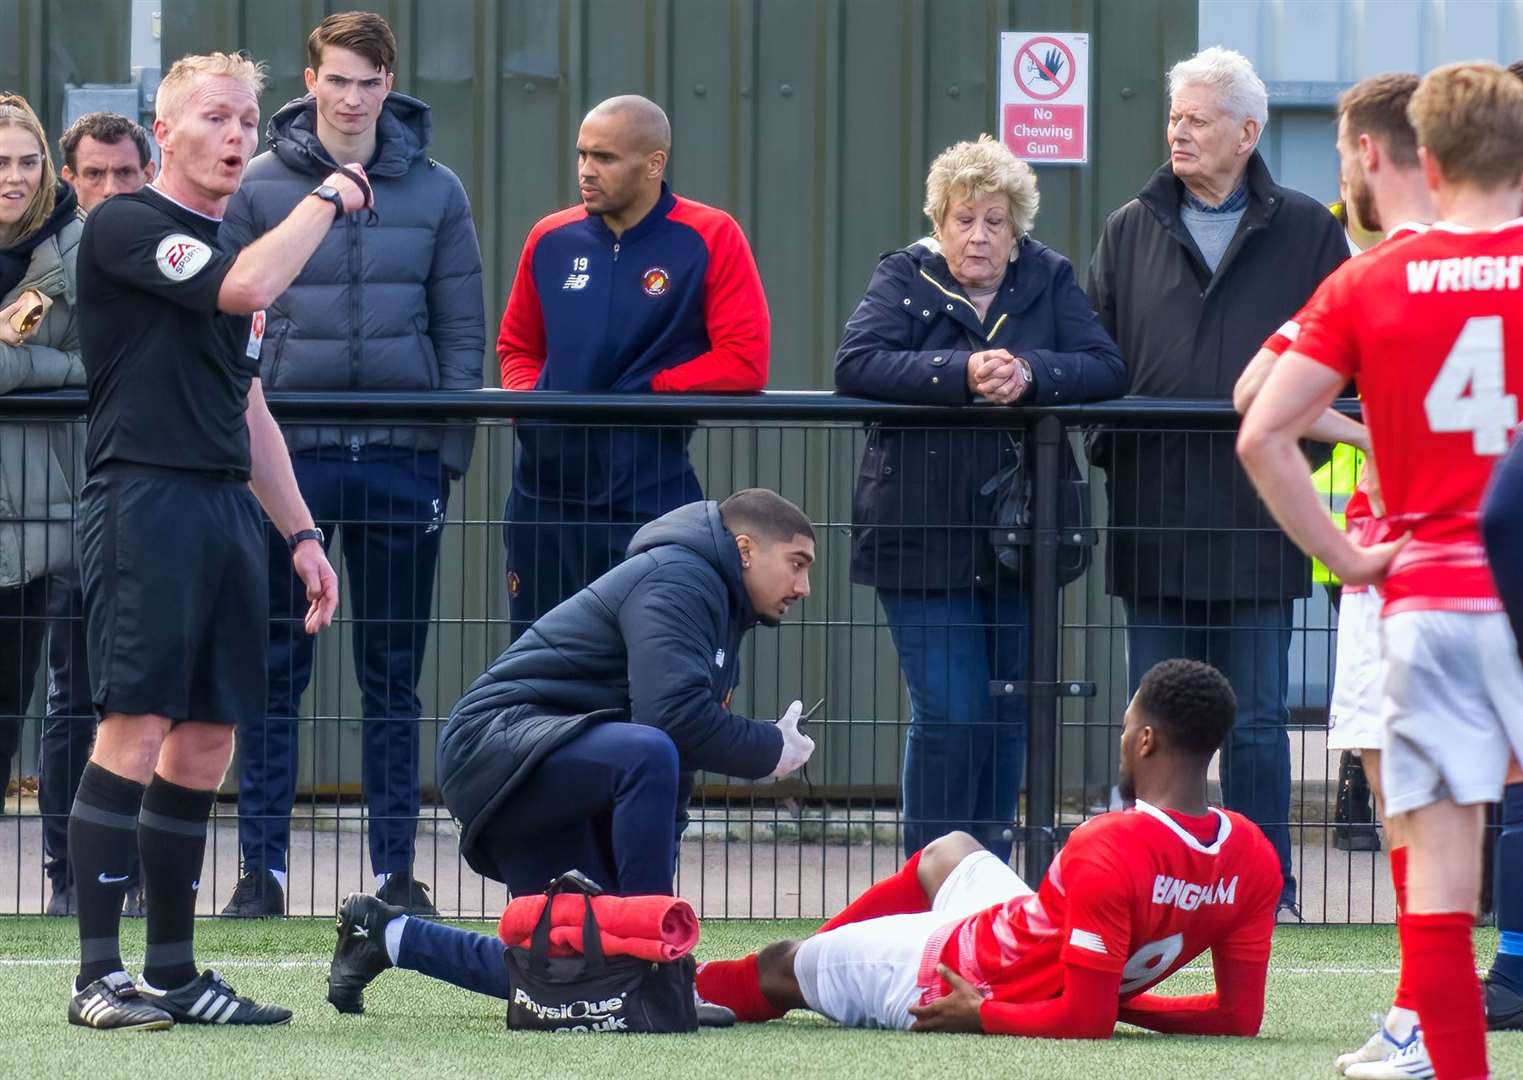 Rakish Bingham receives medical attention after rupturing his Achilles at Slough. Picture: Ed Miller/EUFC